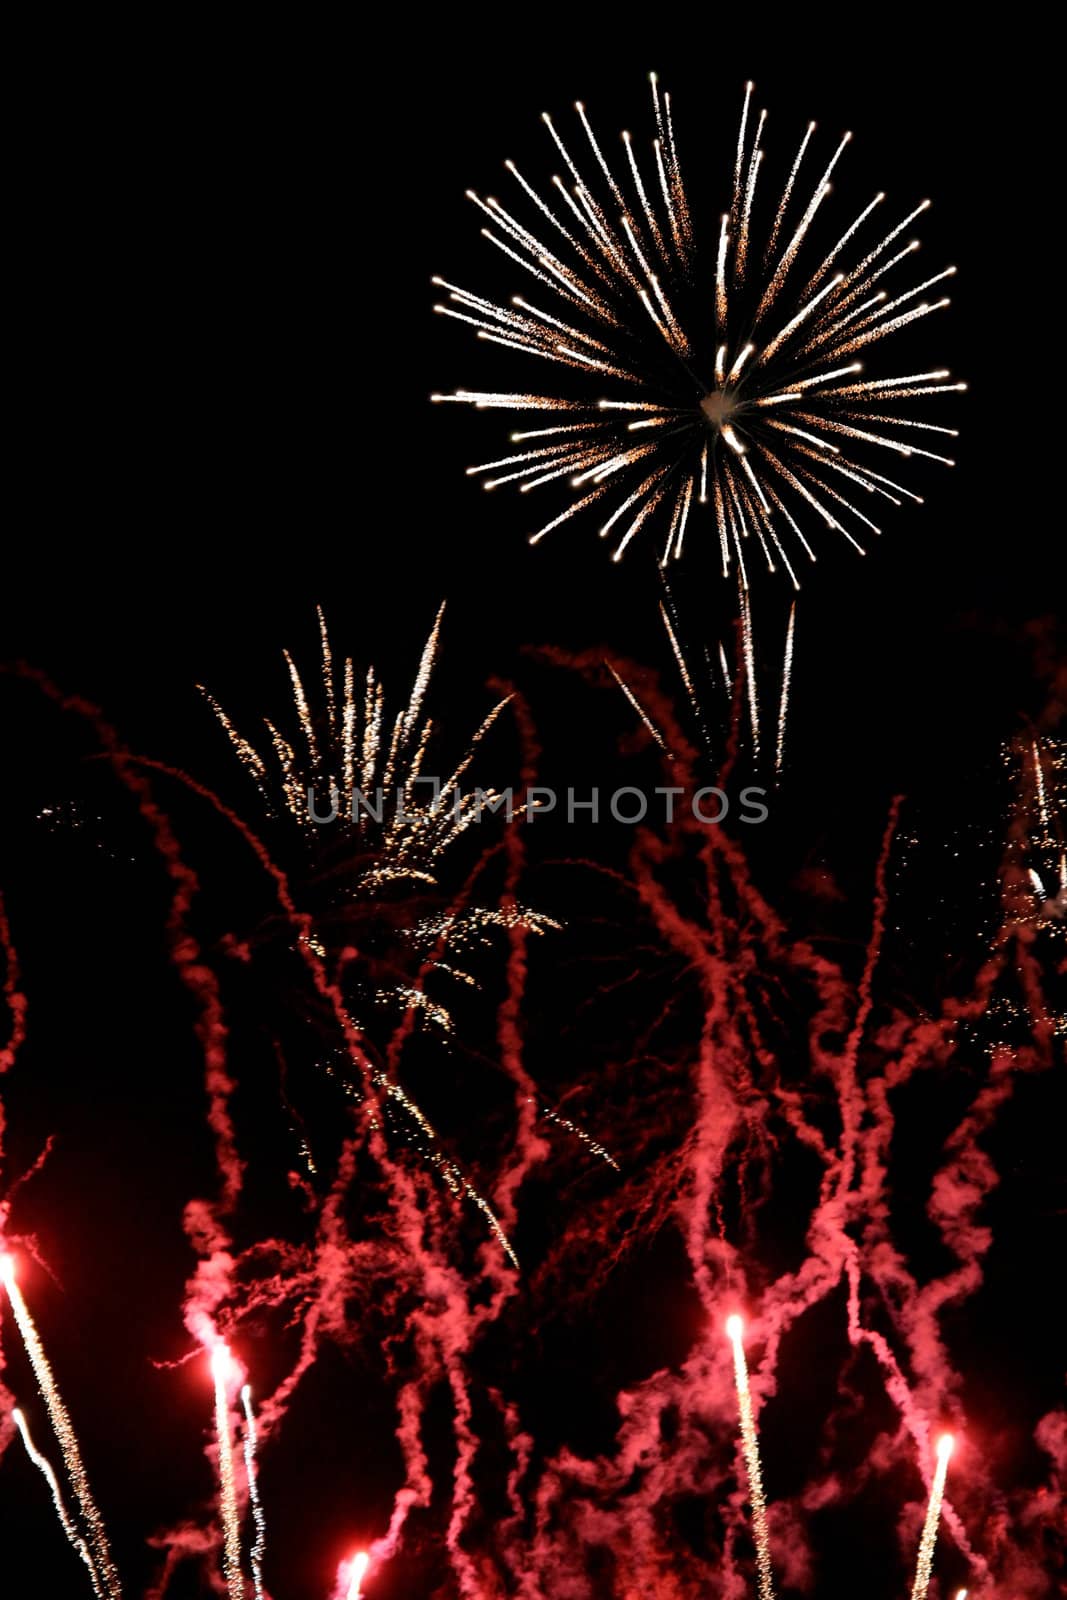 Red and white fireworks flares, over black